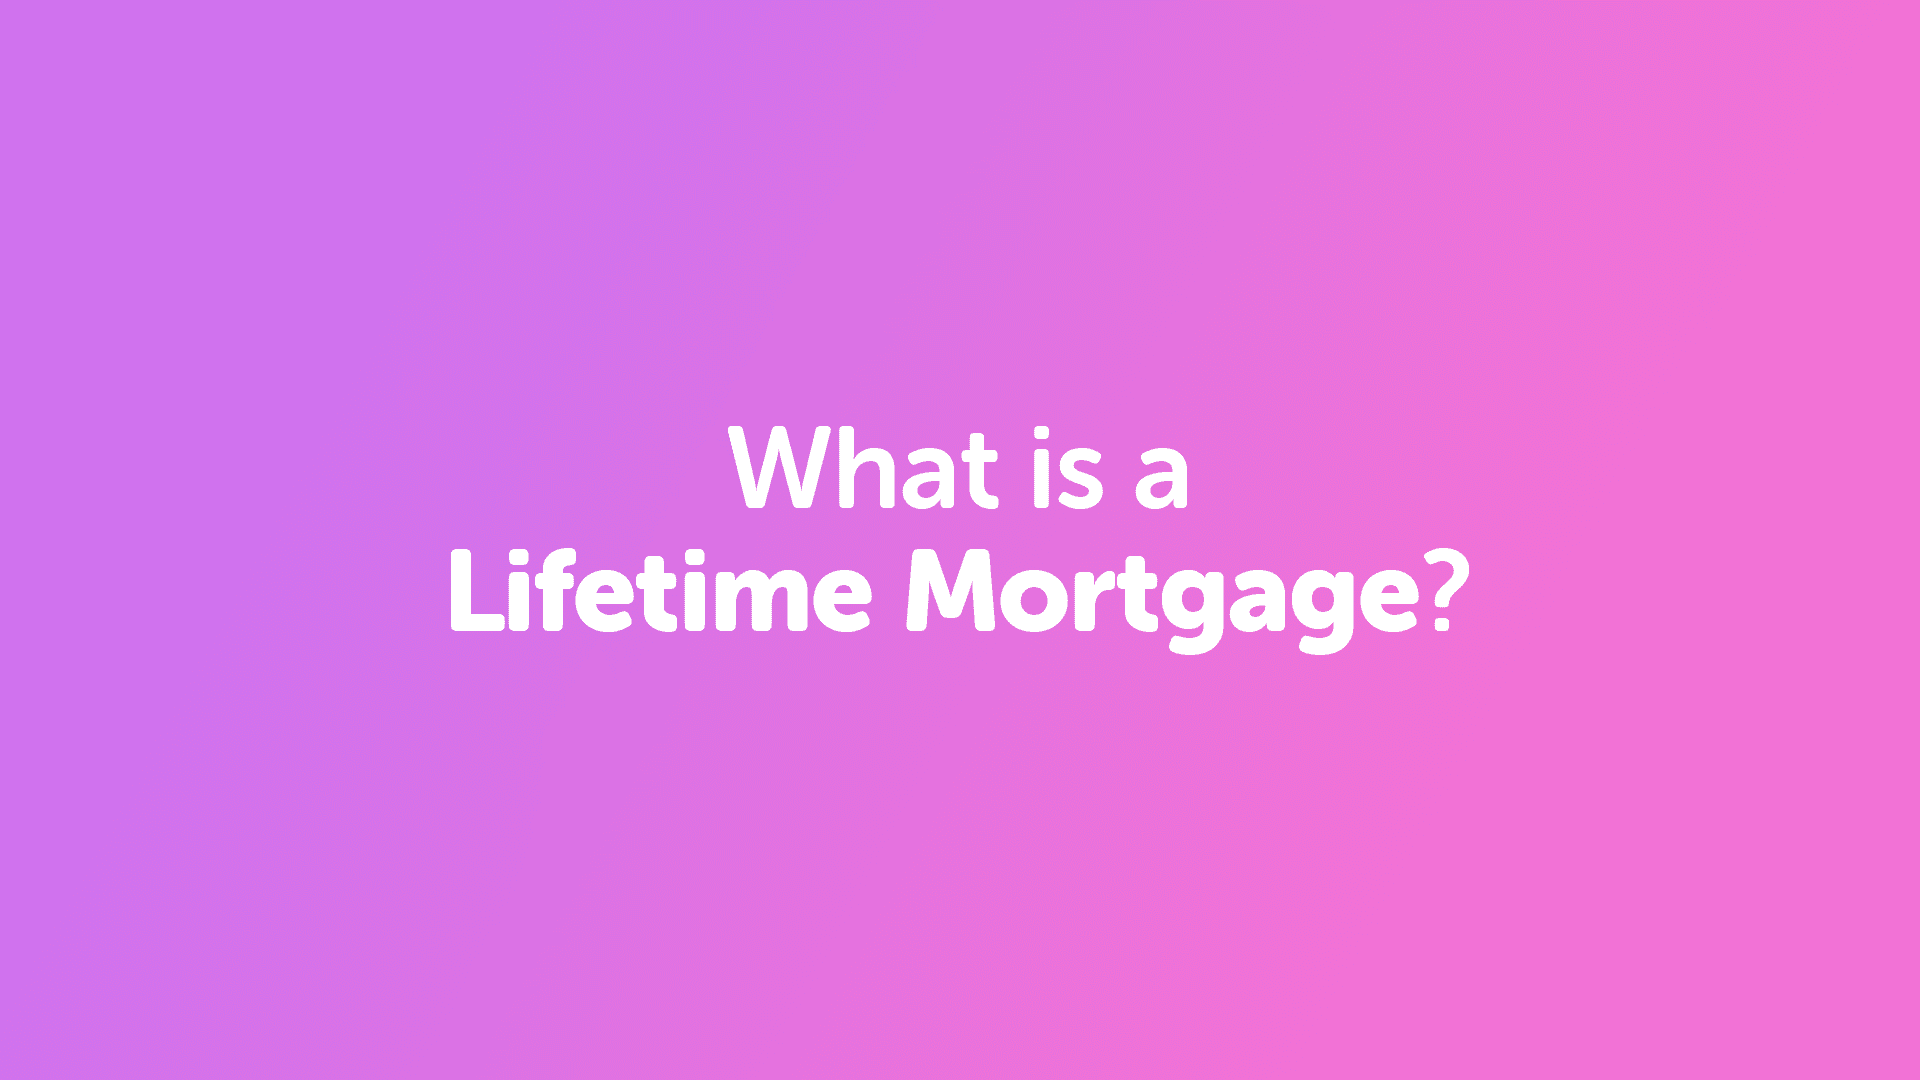 What is a Lifetime Mortgage in Nottingham?